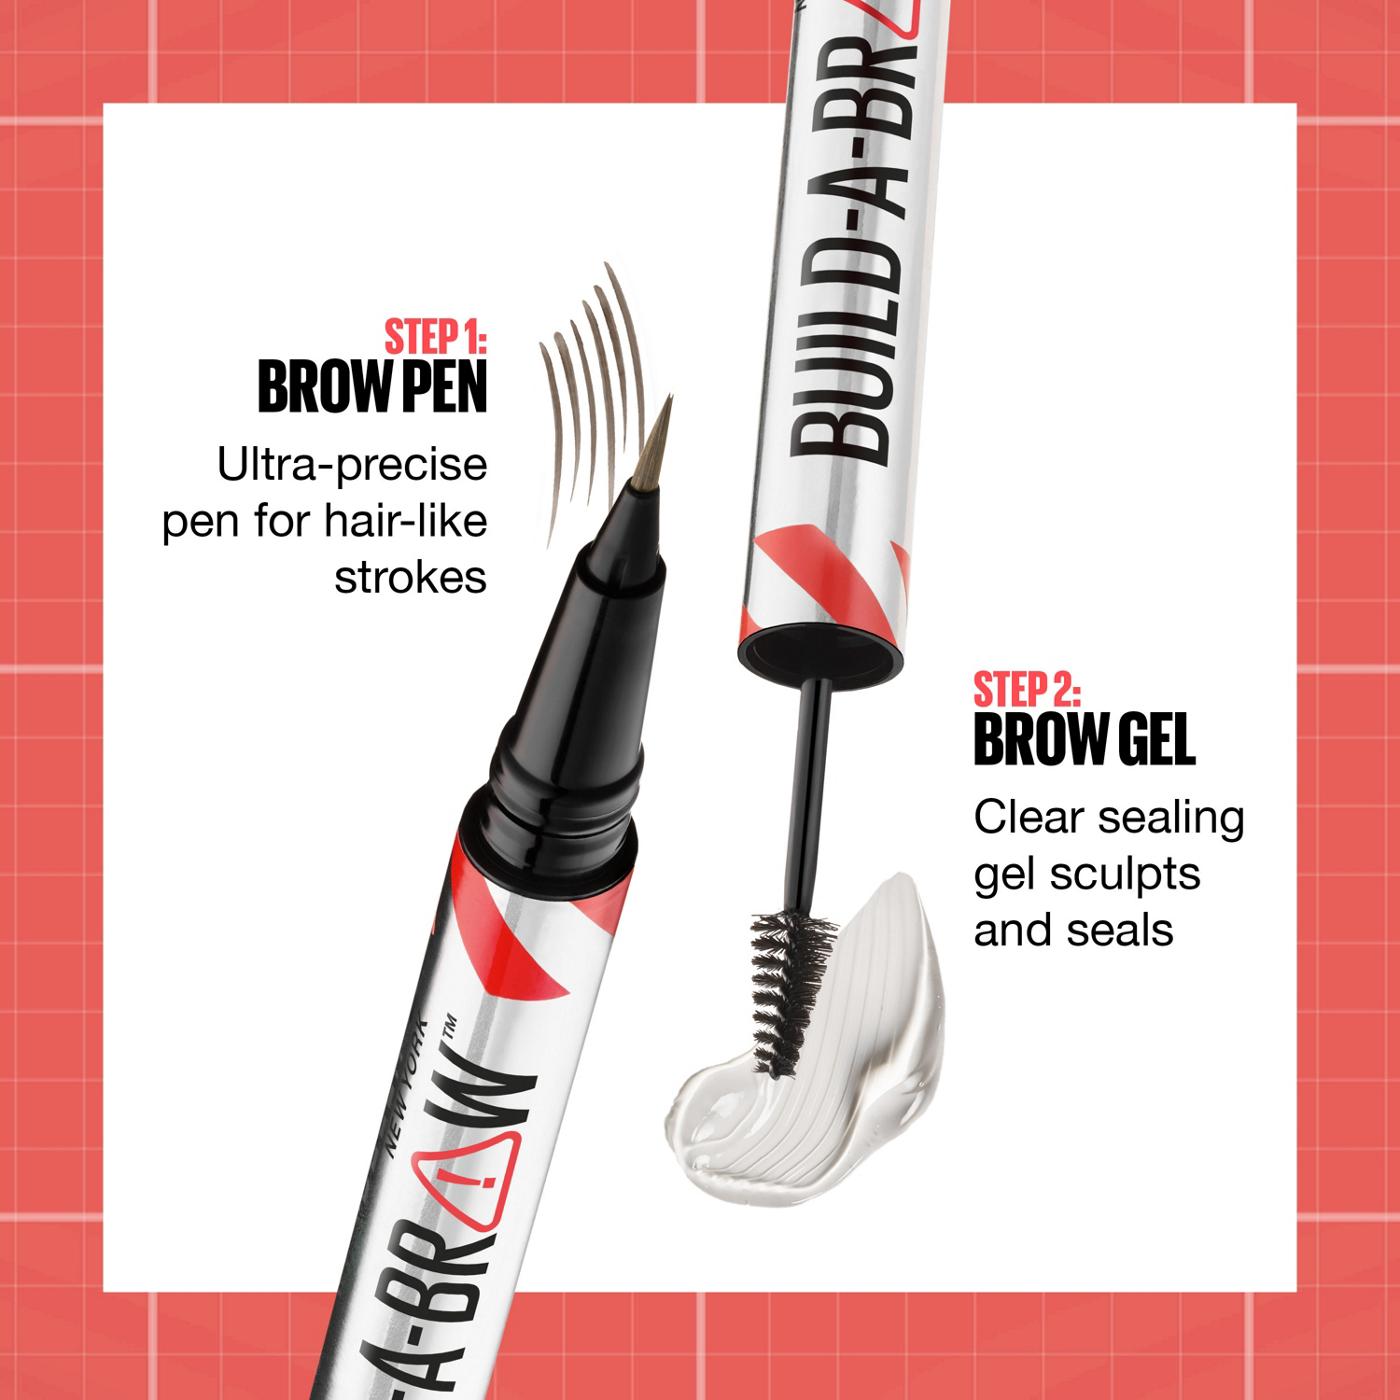 Maybelline Build A Brow 2 In 1 Brow Pen - Medium Brown; image 14 of 16